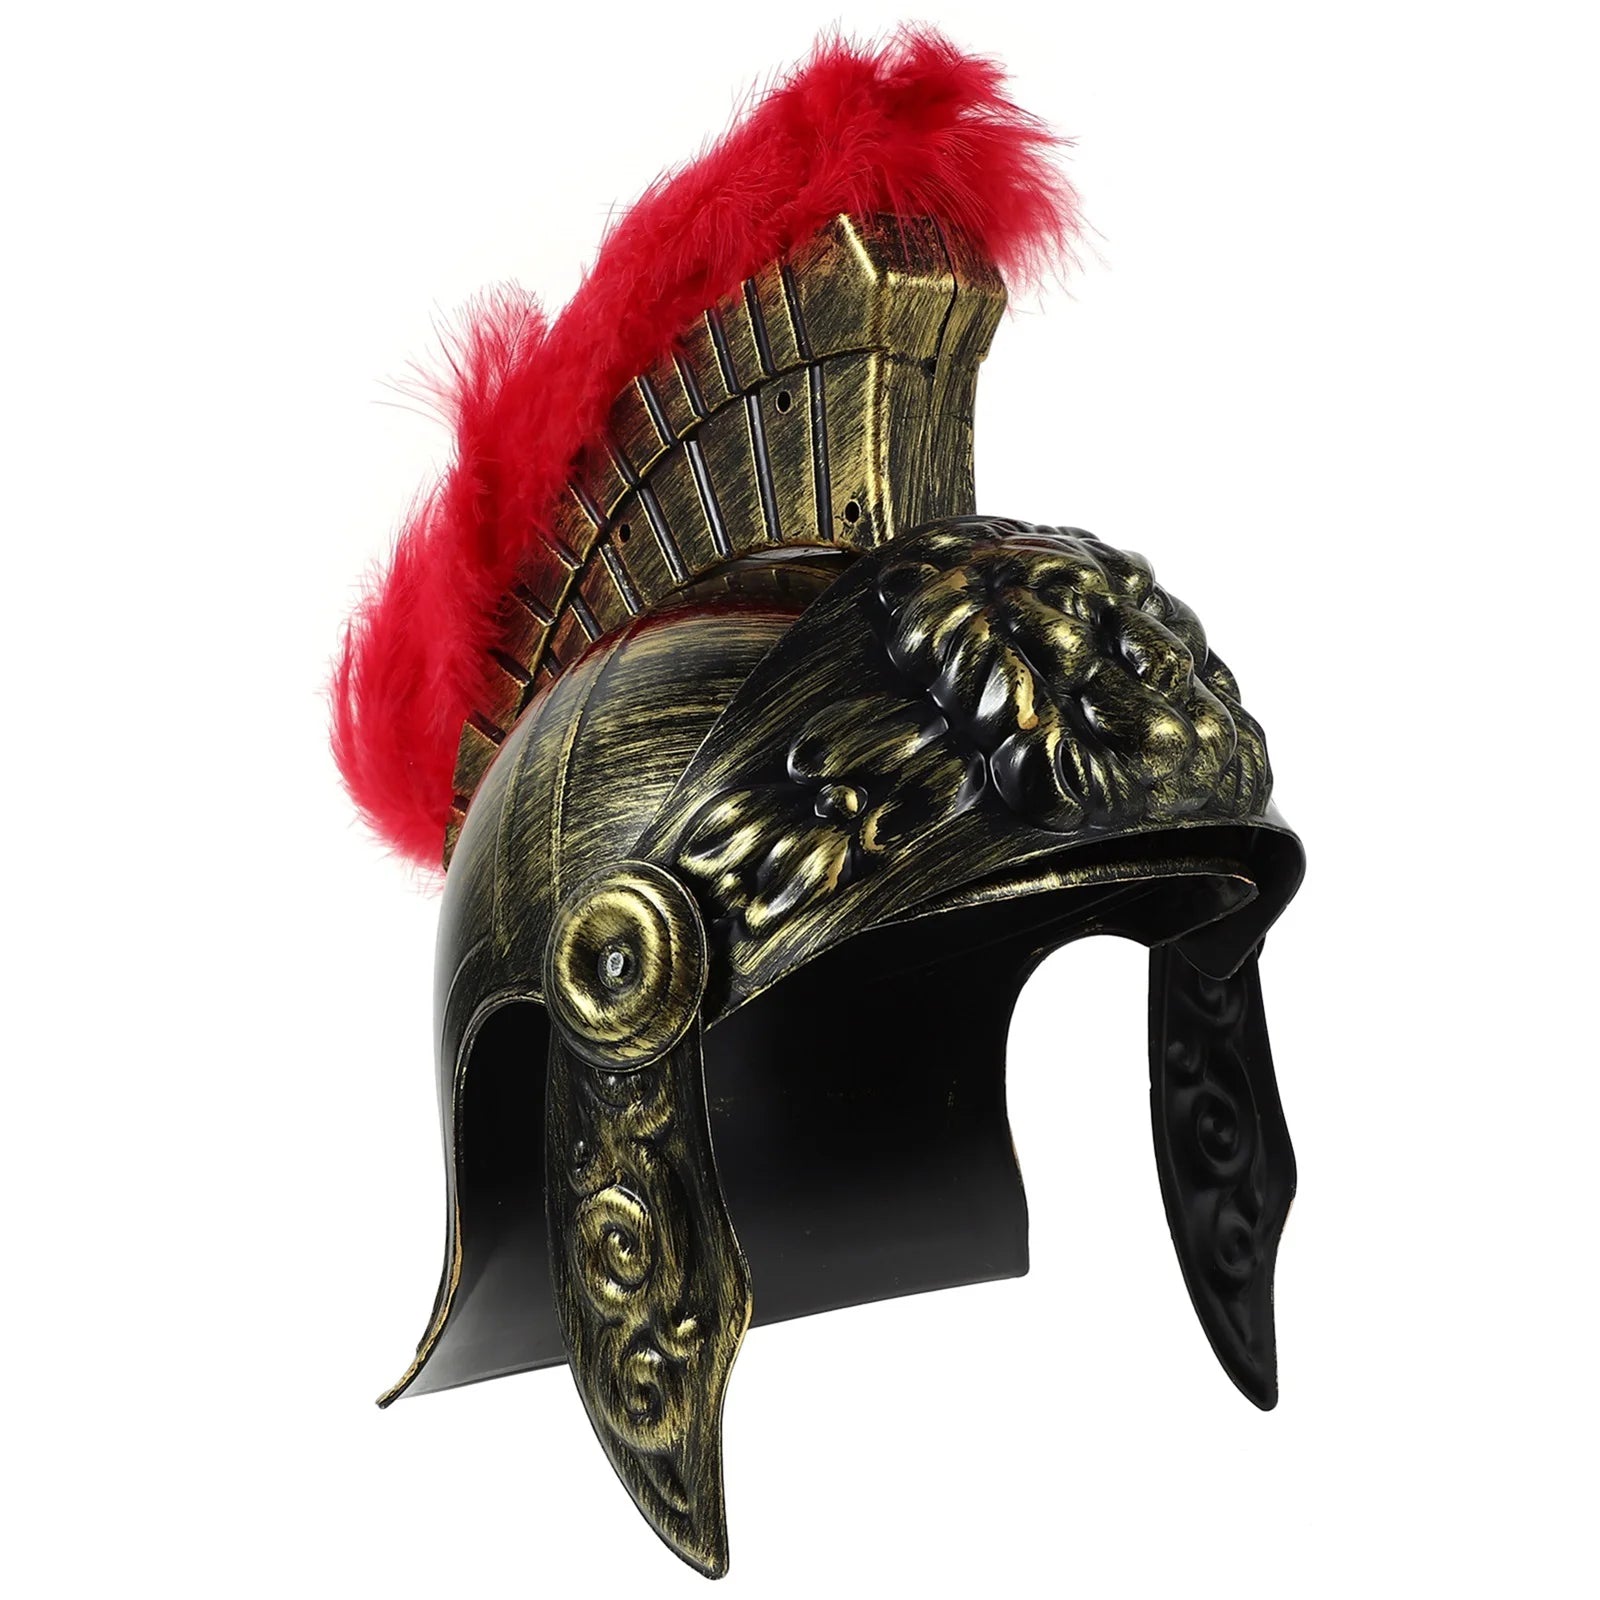 Hat Men Warrior Adults Roman Men Middle Ages Bonnets Soldier Gladiator Pirate Warrior Cosplay Costume